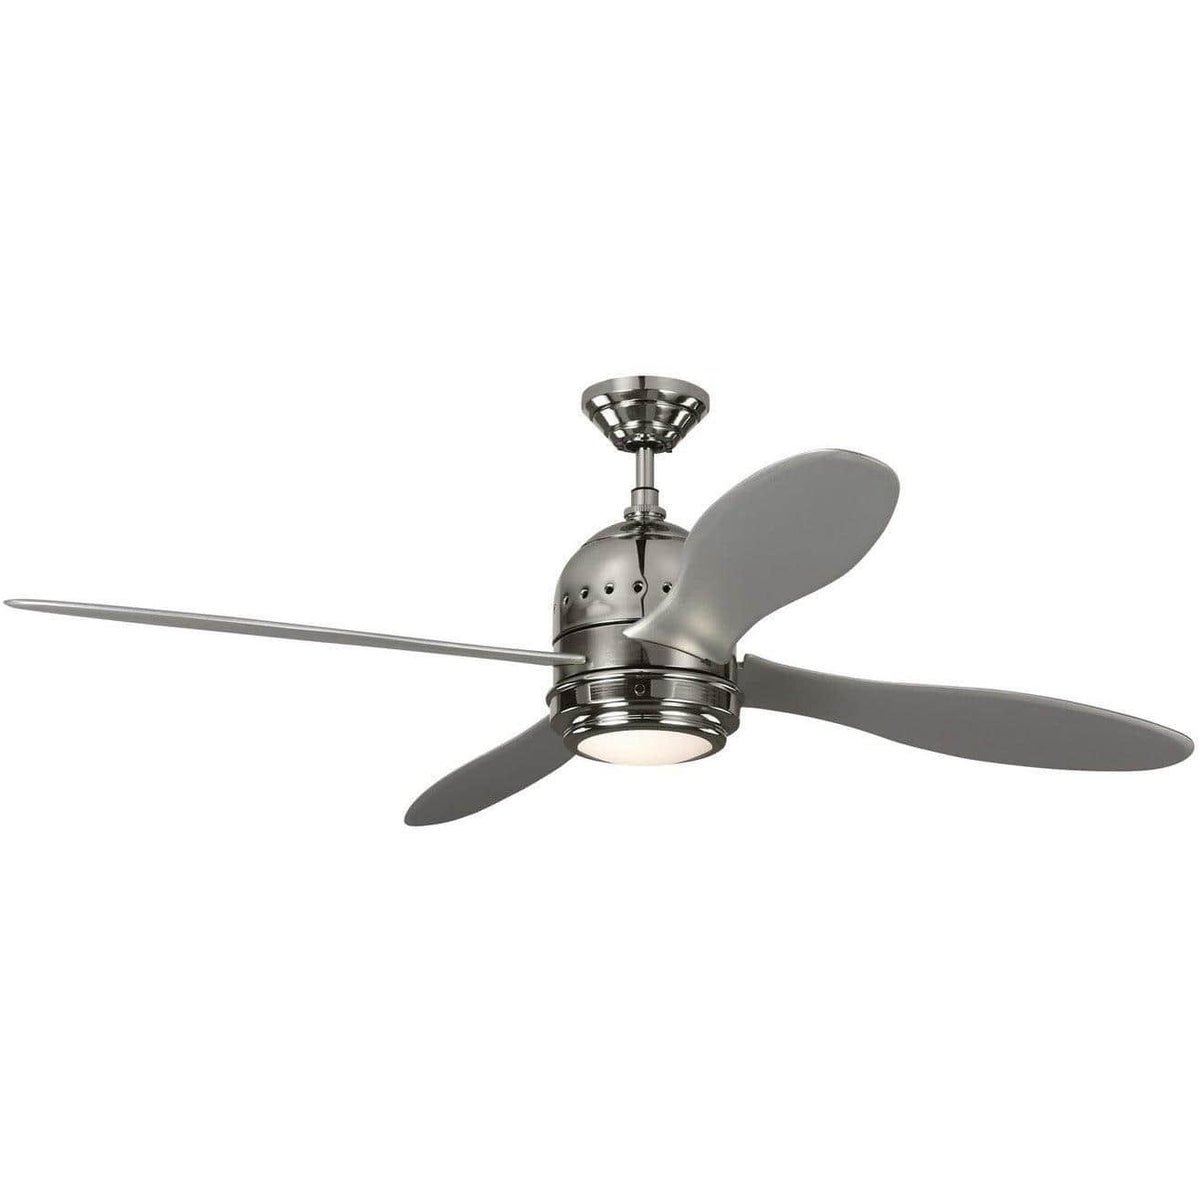 Visual Comfort Fan Collection - Metrograph 56" Ceiling Fan - 4TSR56PNGRYD | Montreal Lighting & Hardware